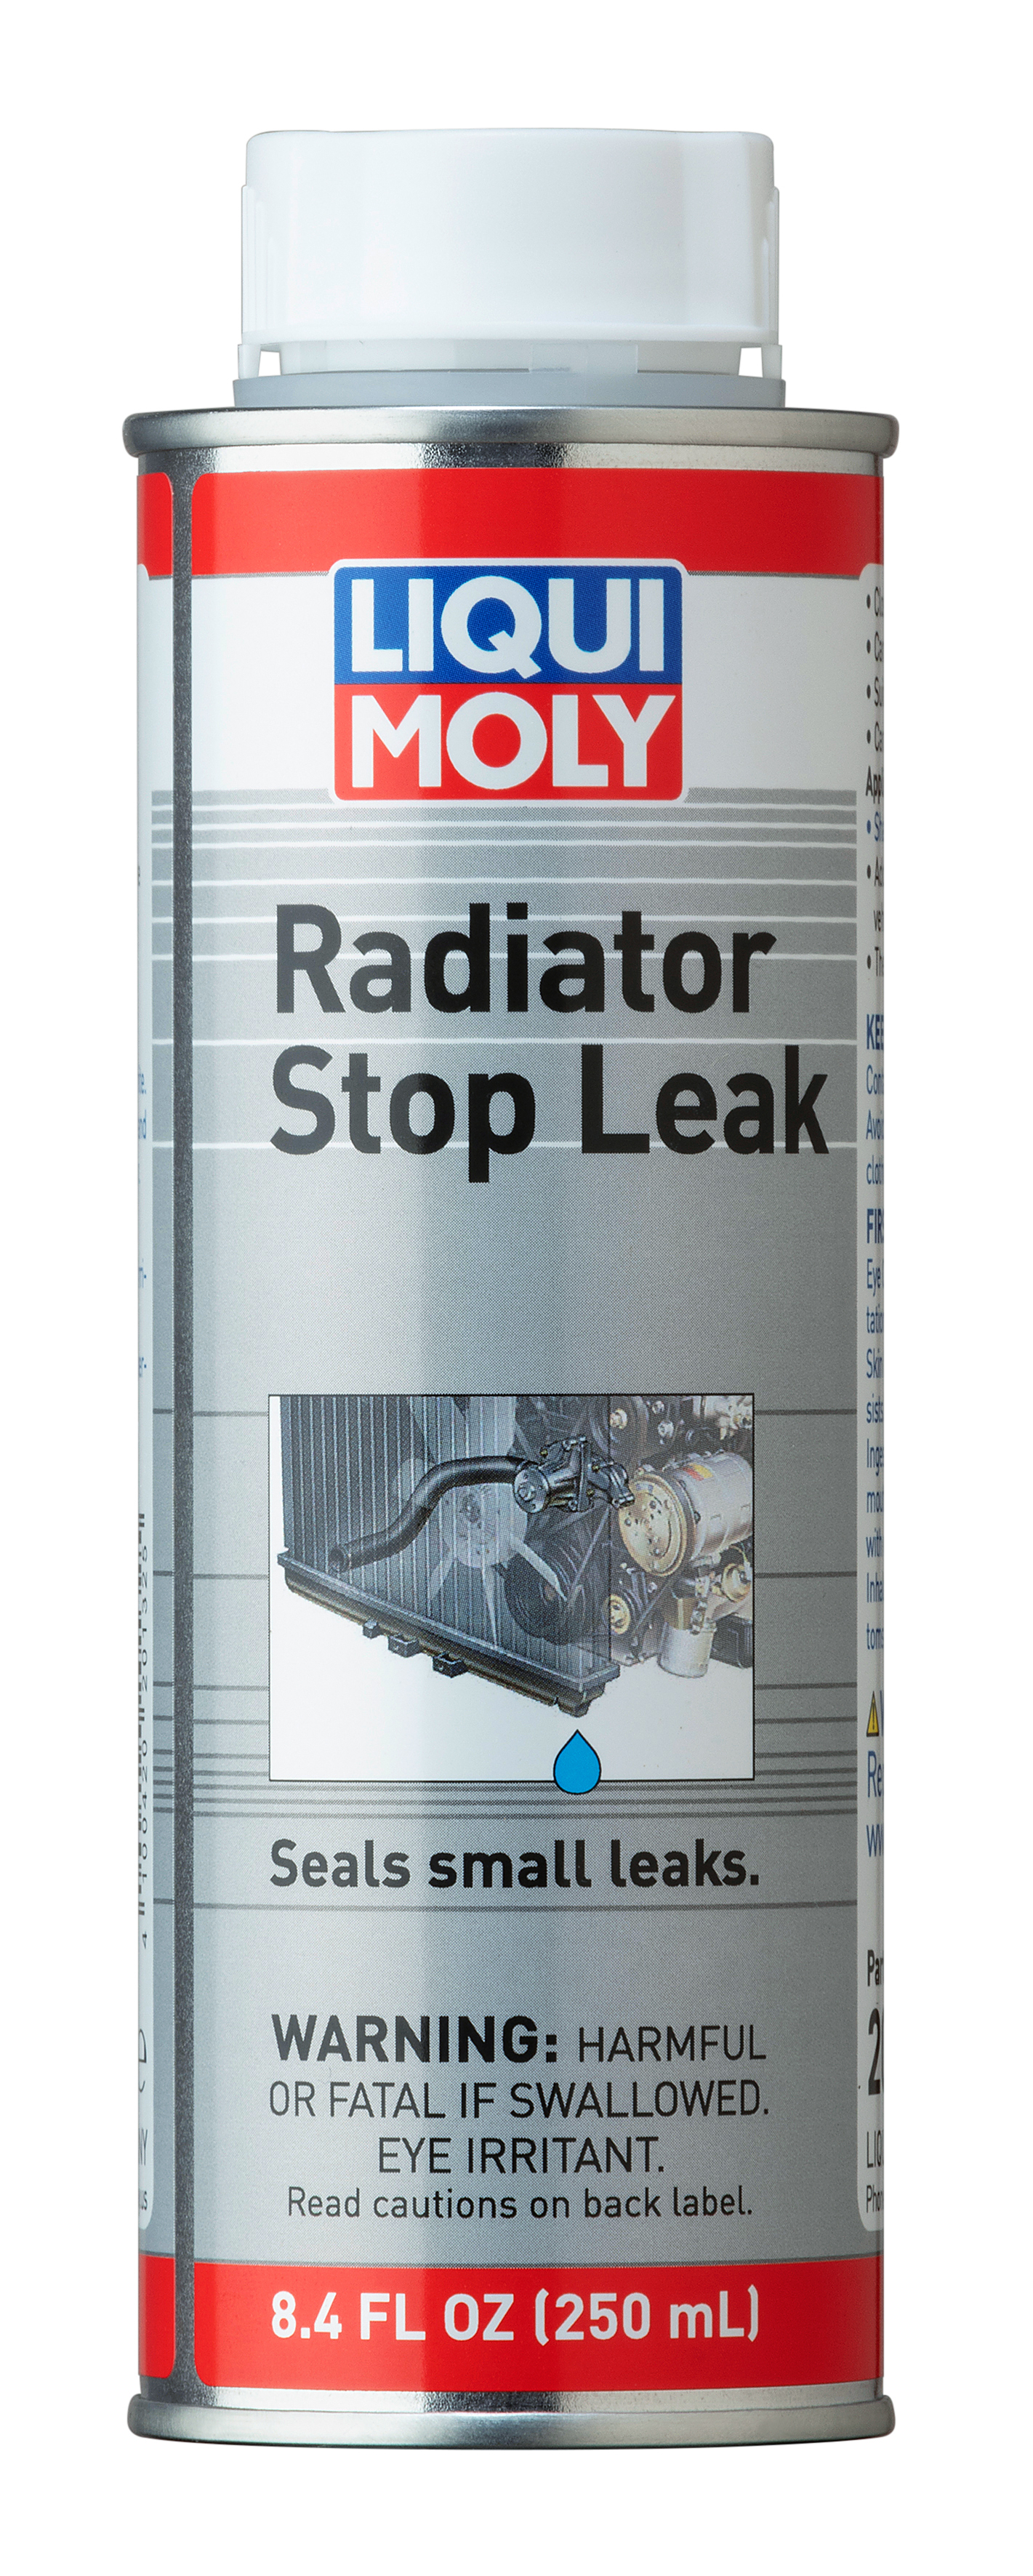 Show details for LIQUI MOLY 20132 Radiator Stop Leak - 250 Ml Can